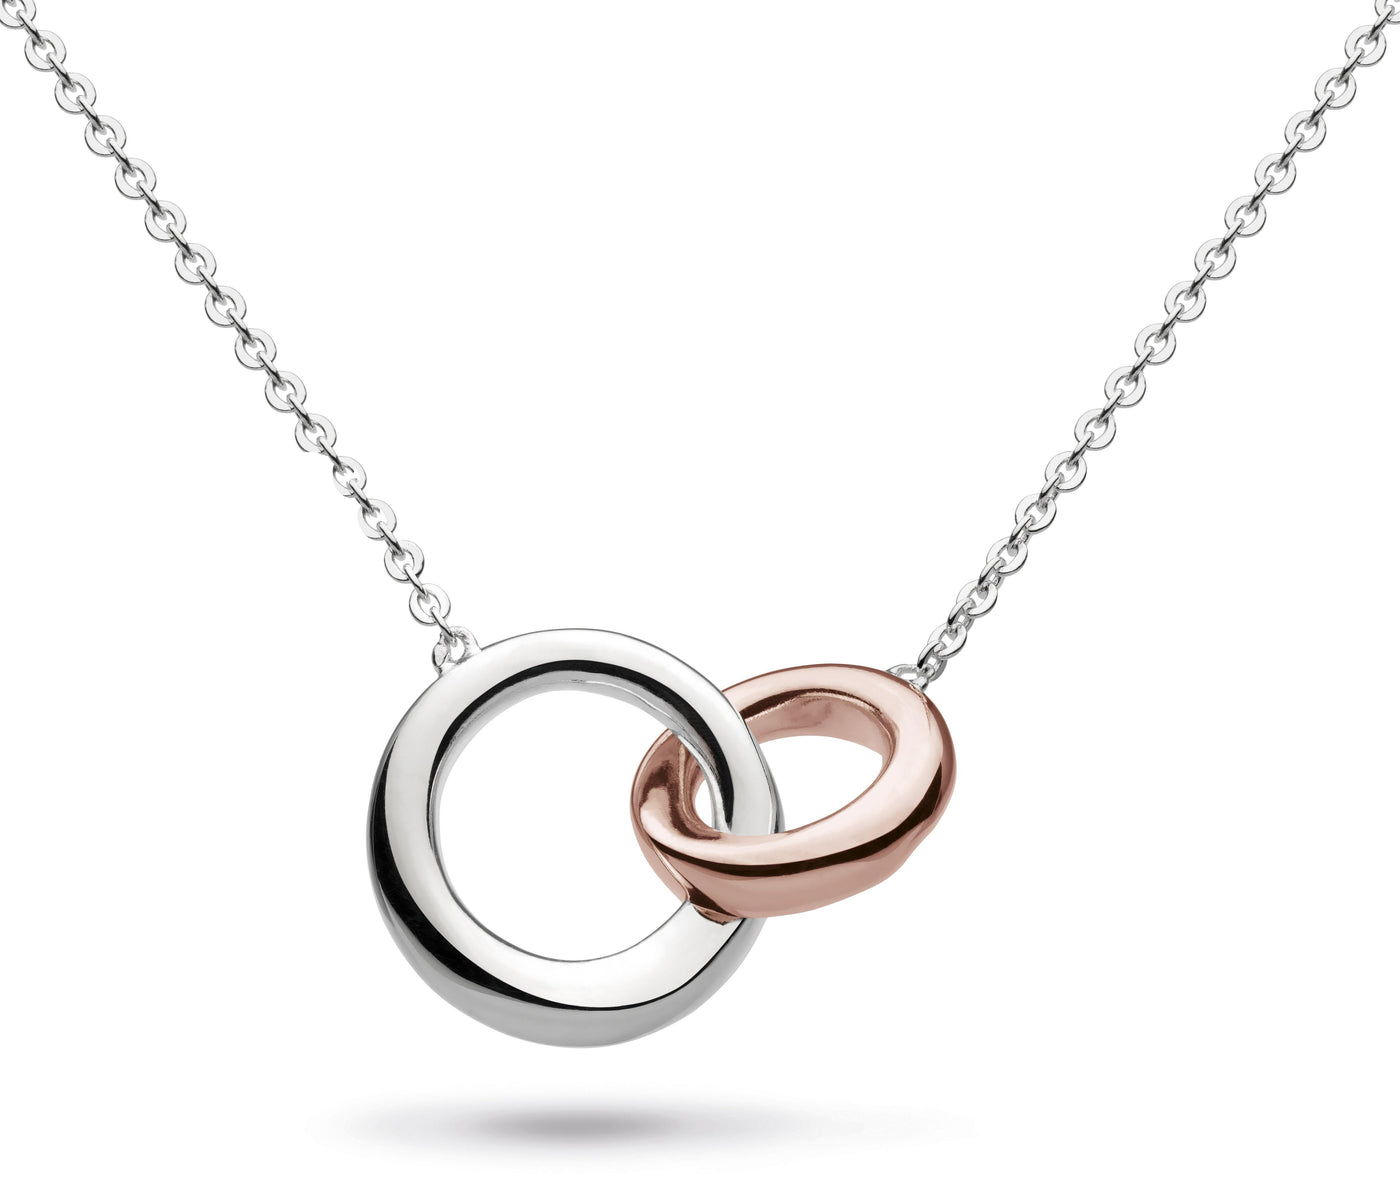 Kit Heath Bevel Cirque Link Necklace in Sterling Silver & Rose Gold - Rococo Jewellery